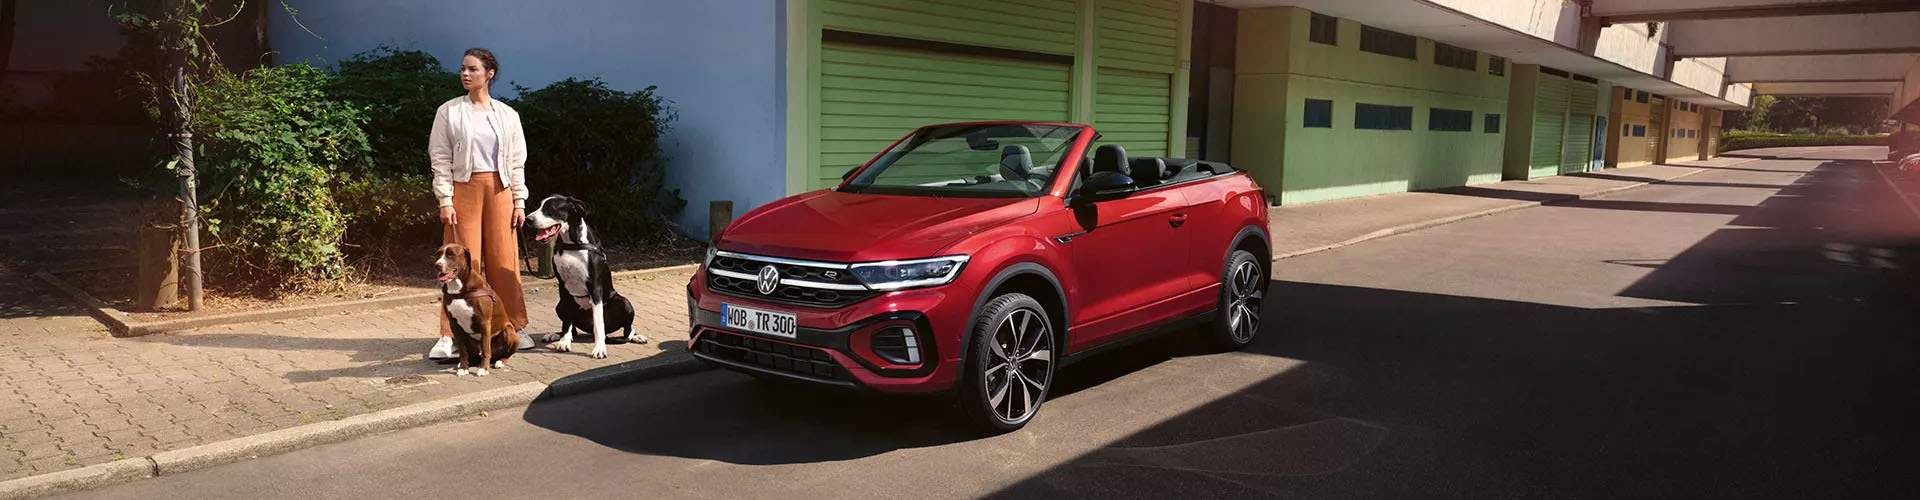 VW T-Roc Cabriolet in R-Line rot